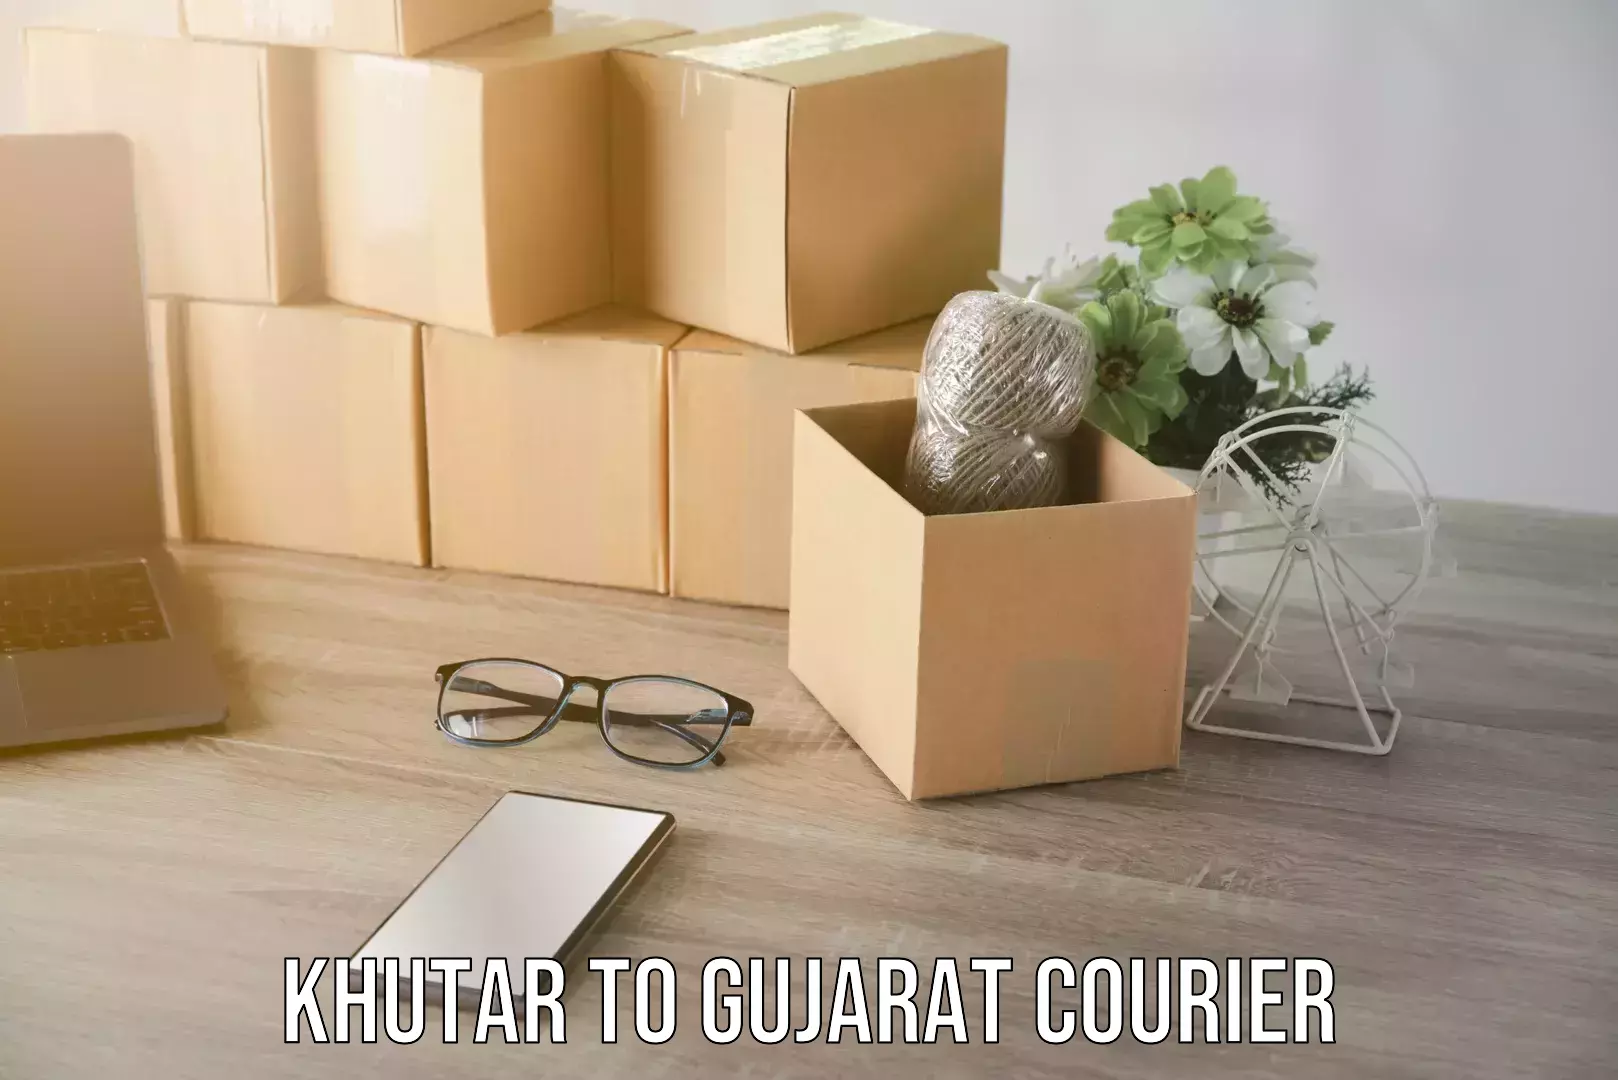 Trusted relocation experts Khutar to Gujarat